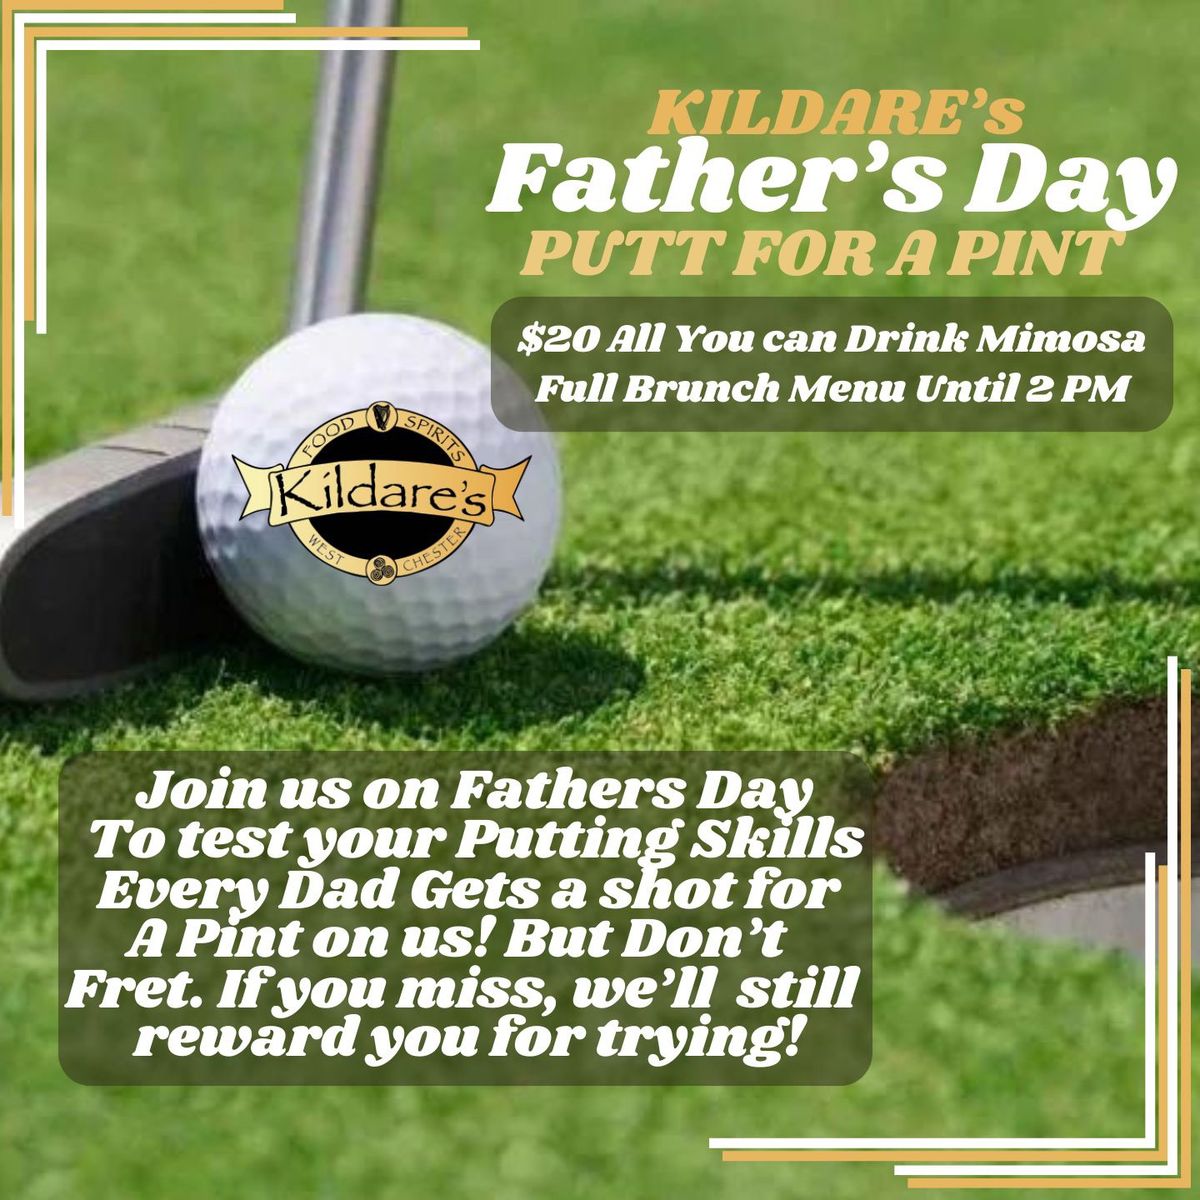 Fathers Day: Come in and Putt for Pints with us.